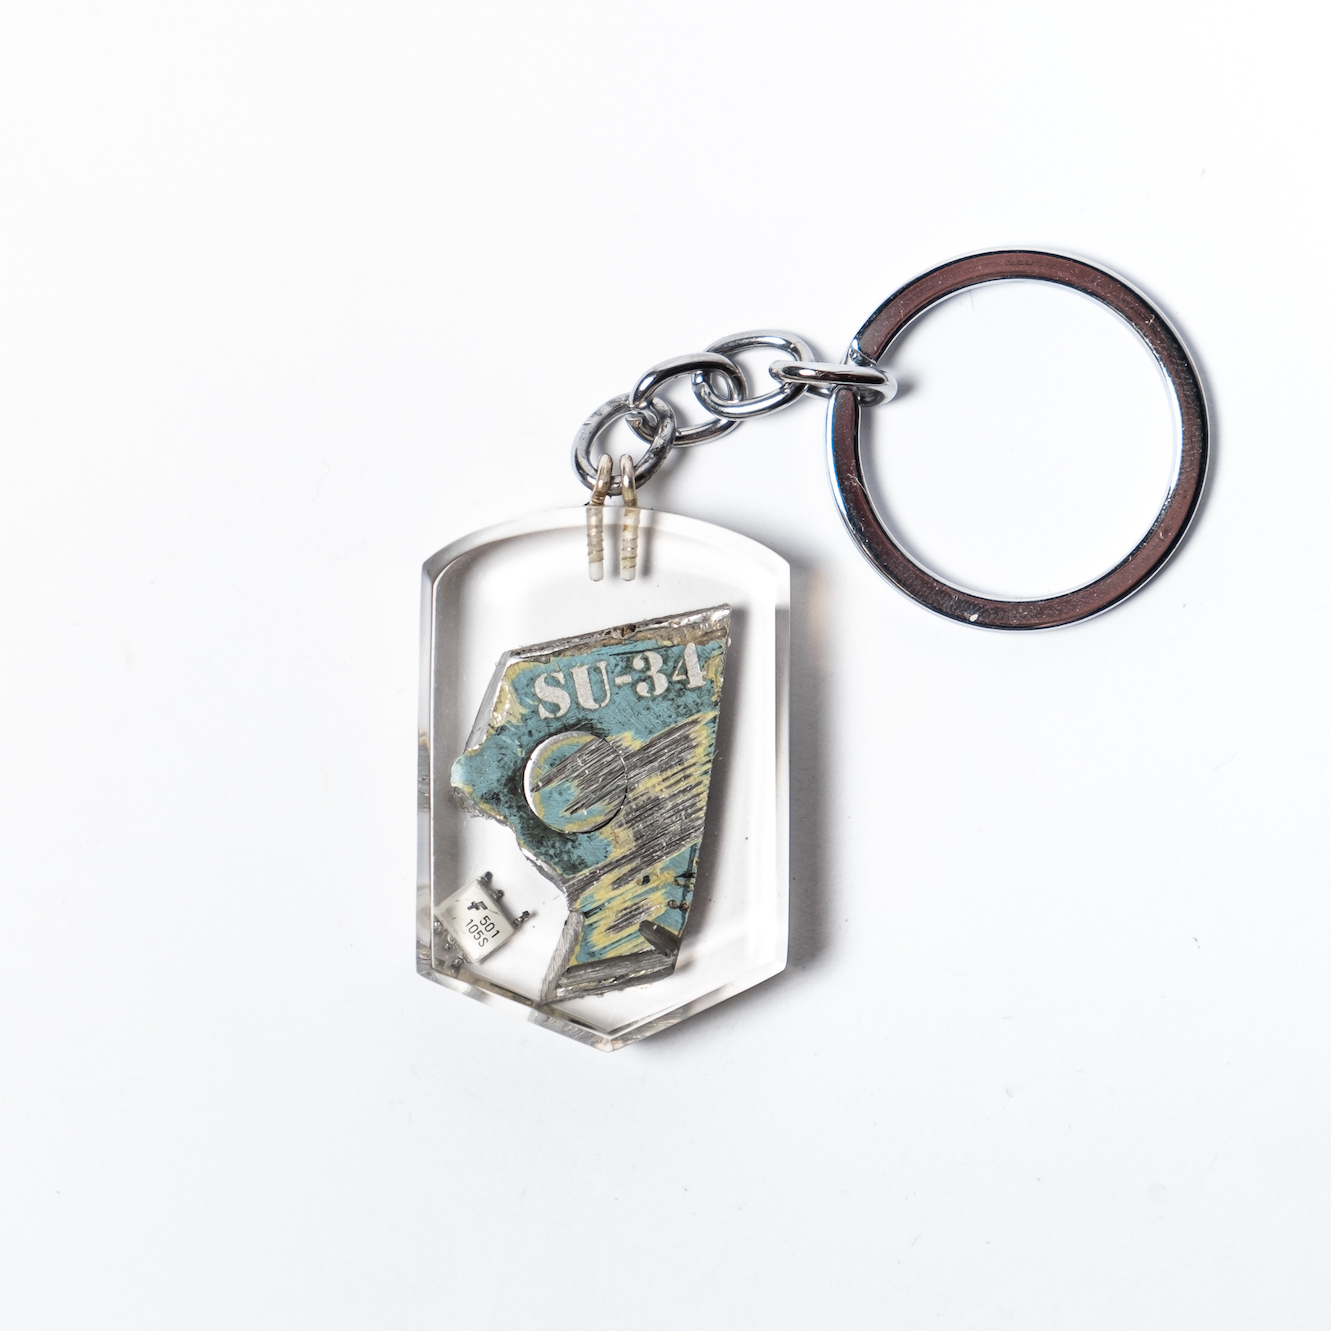 A key ring with a taken down russian SU-34 wreckage